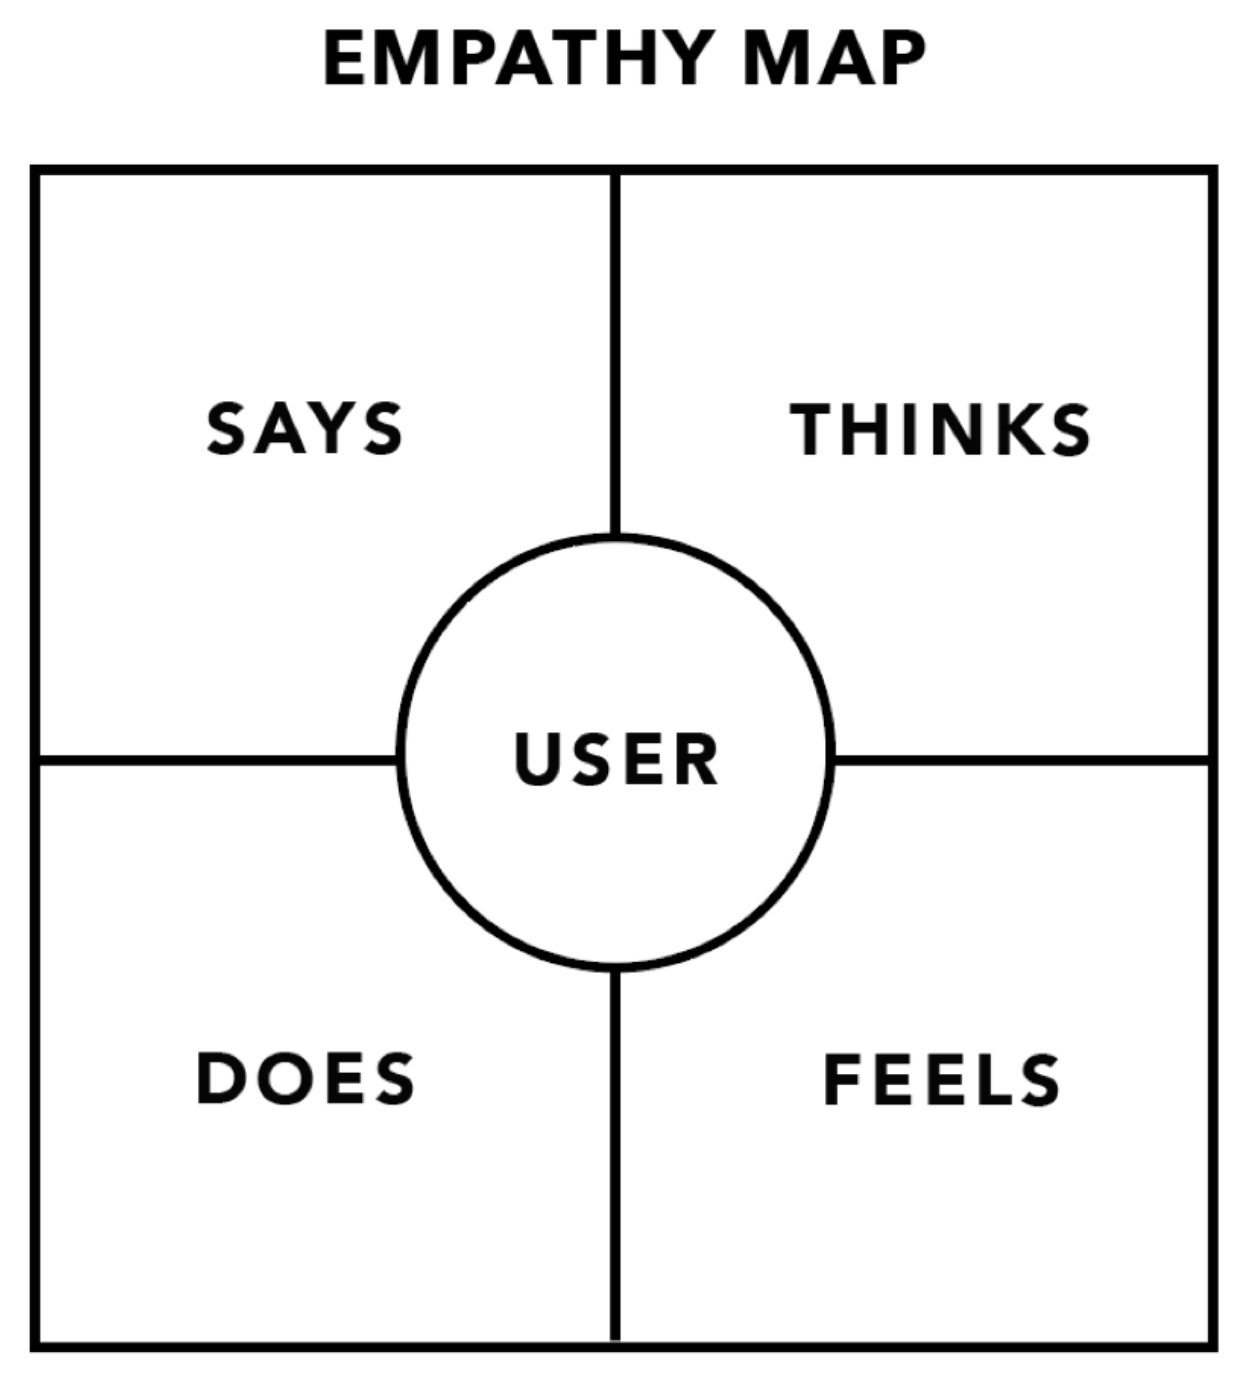 A square with User in the center, surrounded by quadrants that read says, thinks, feels, and does